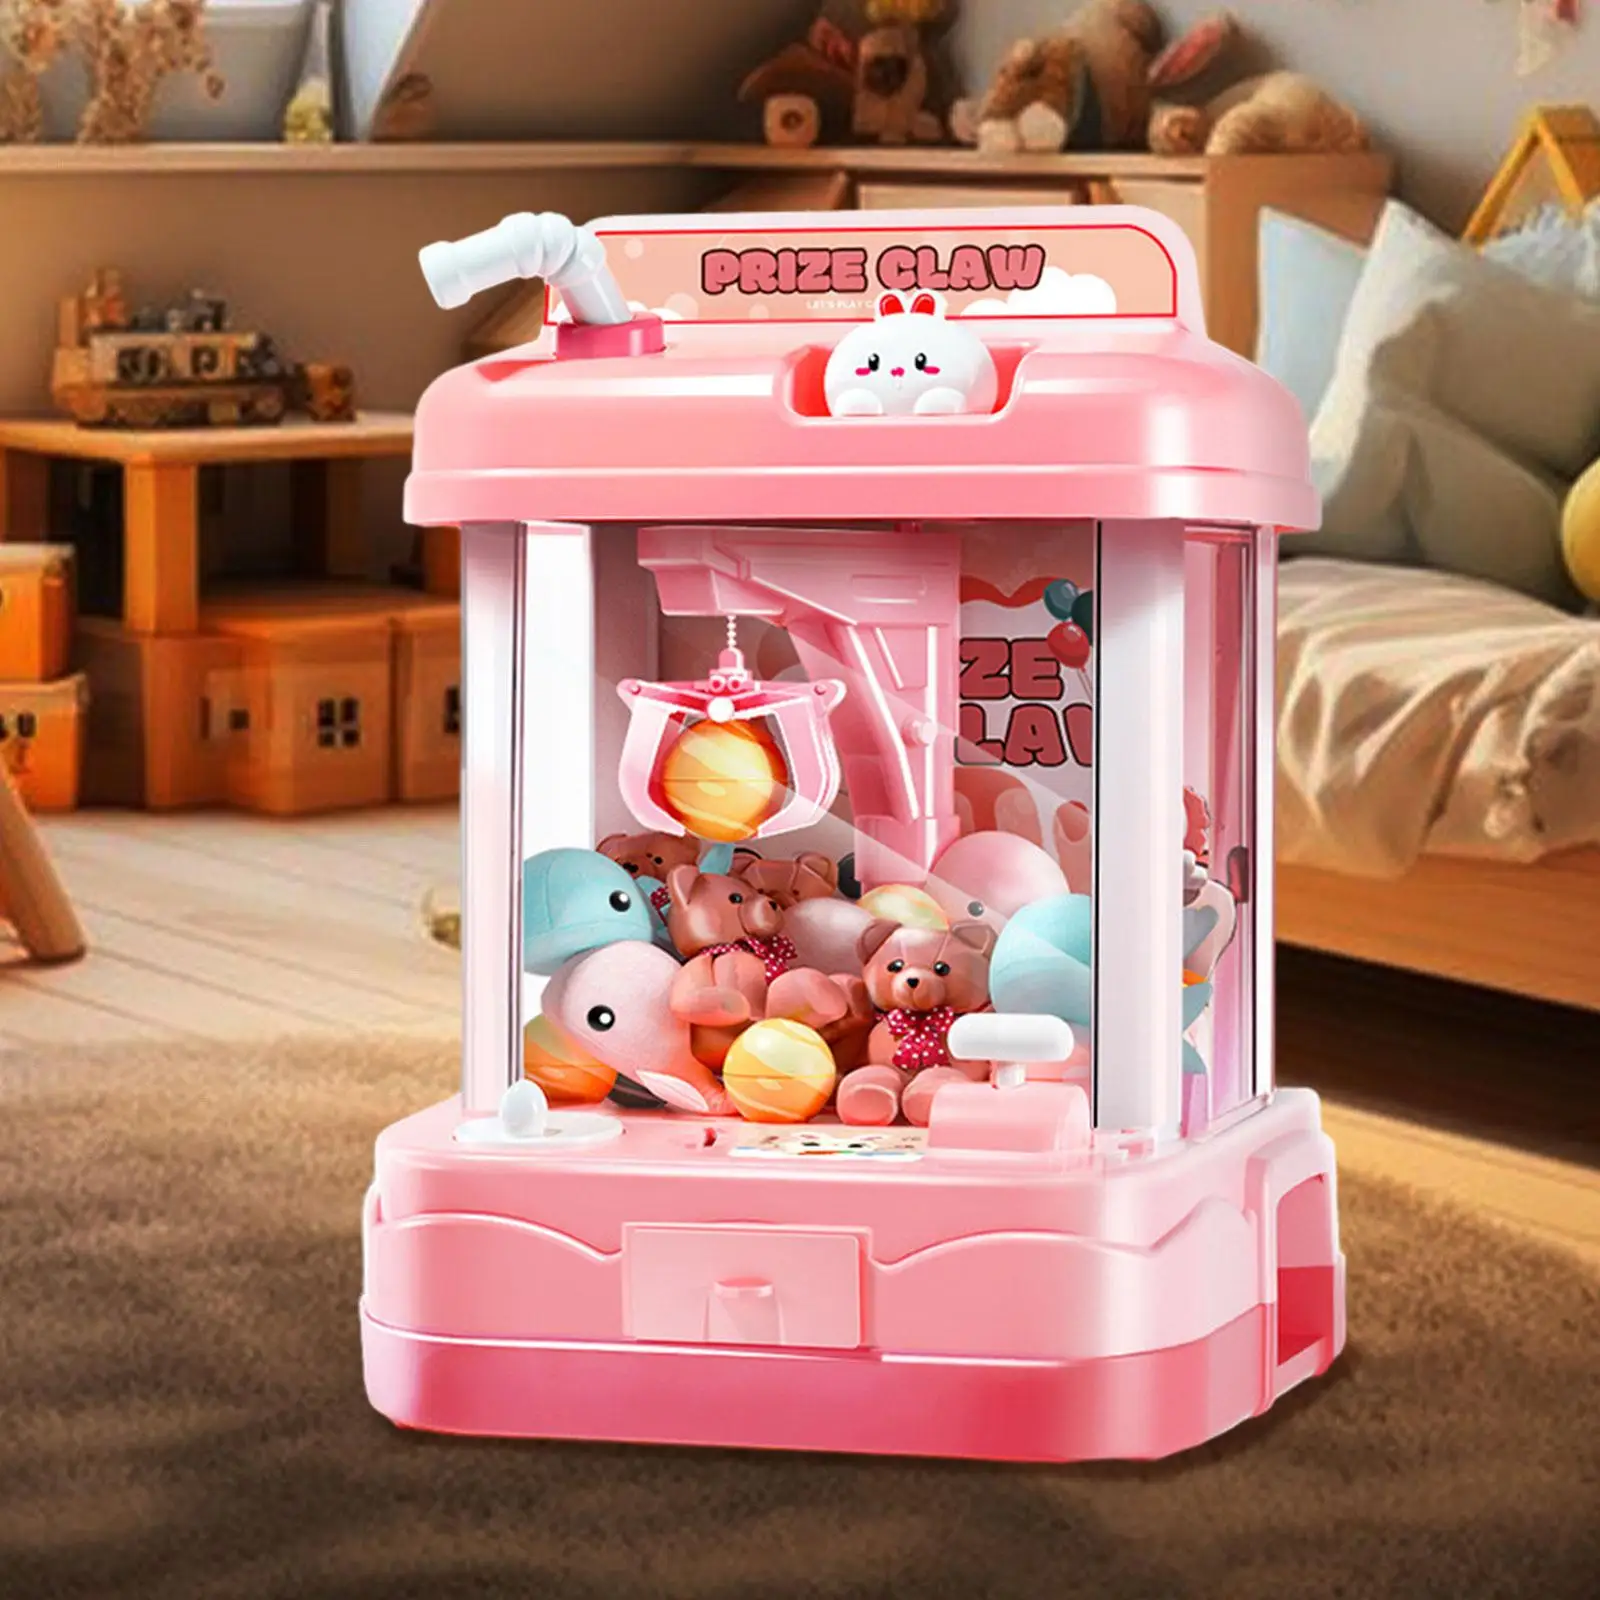 Kids Claw Machine Toy with Mini Balls, Dolls, Tokens, Tumbler Doll Novelty Hand Crank Grab Doll Toy Holiday Gift for Children